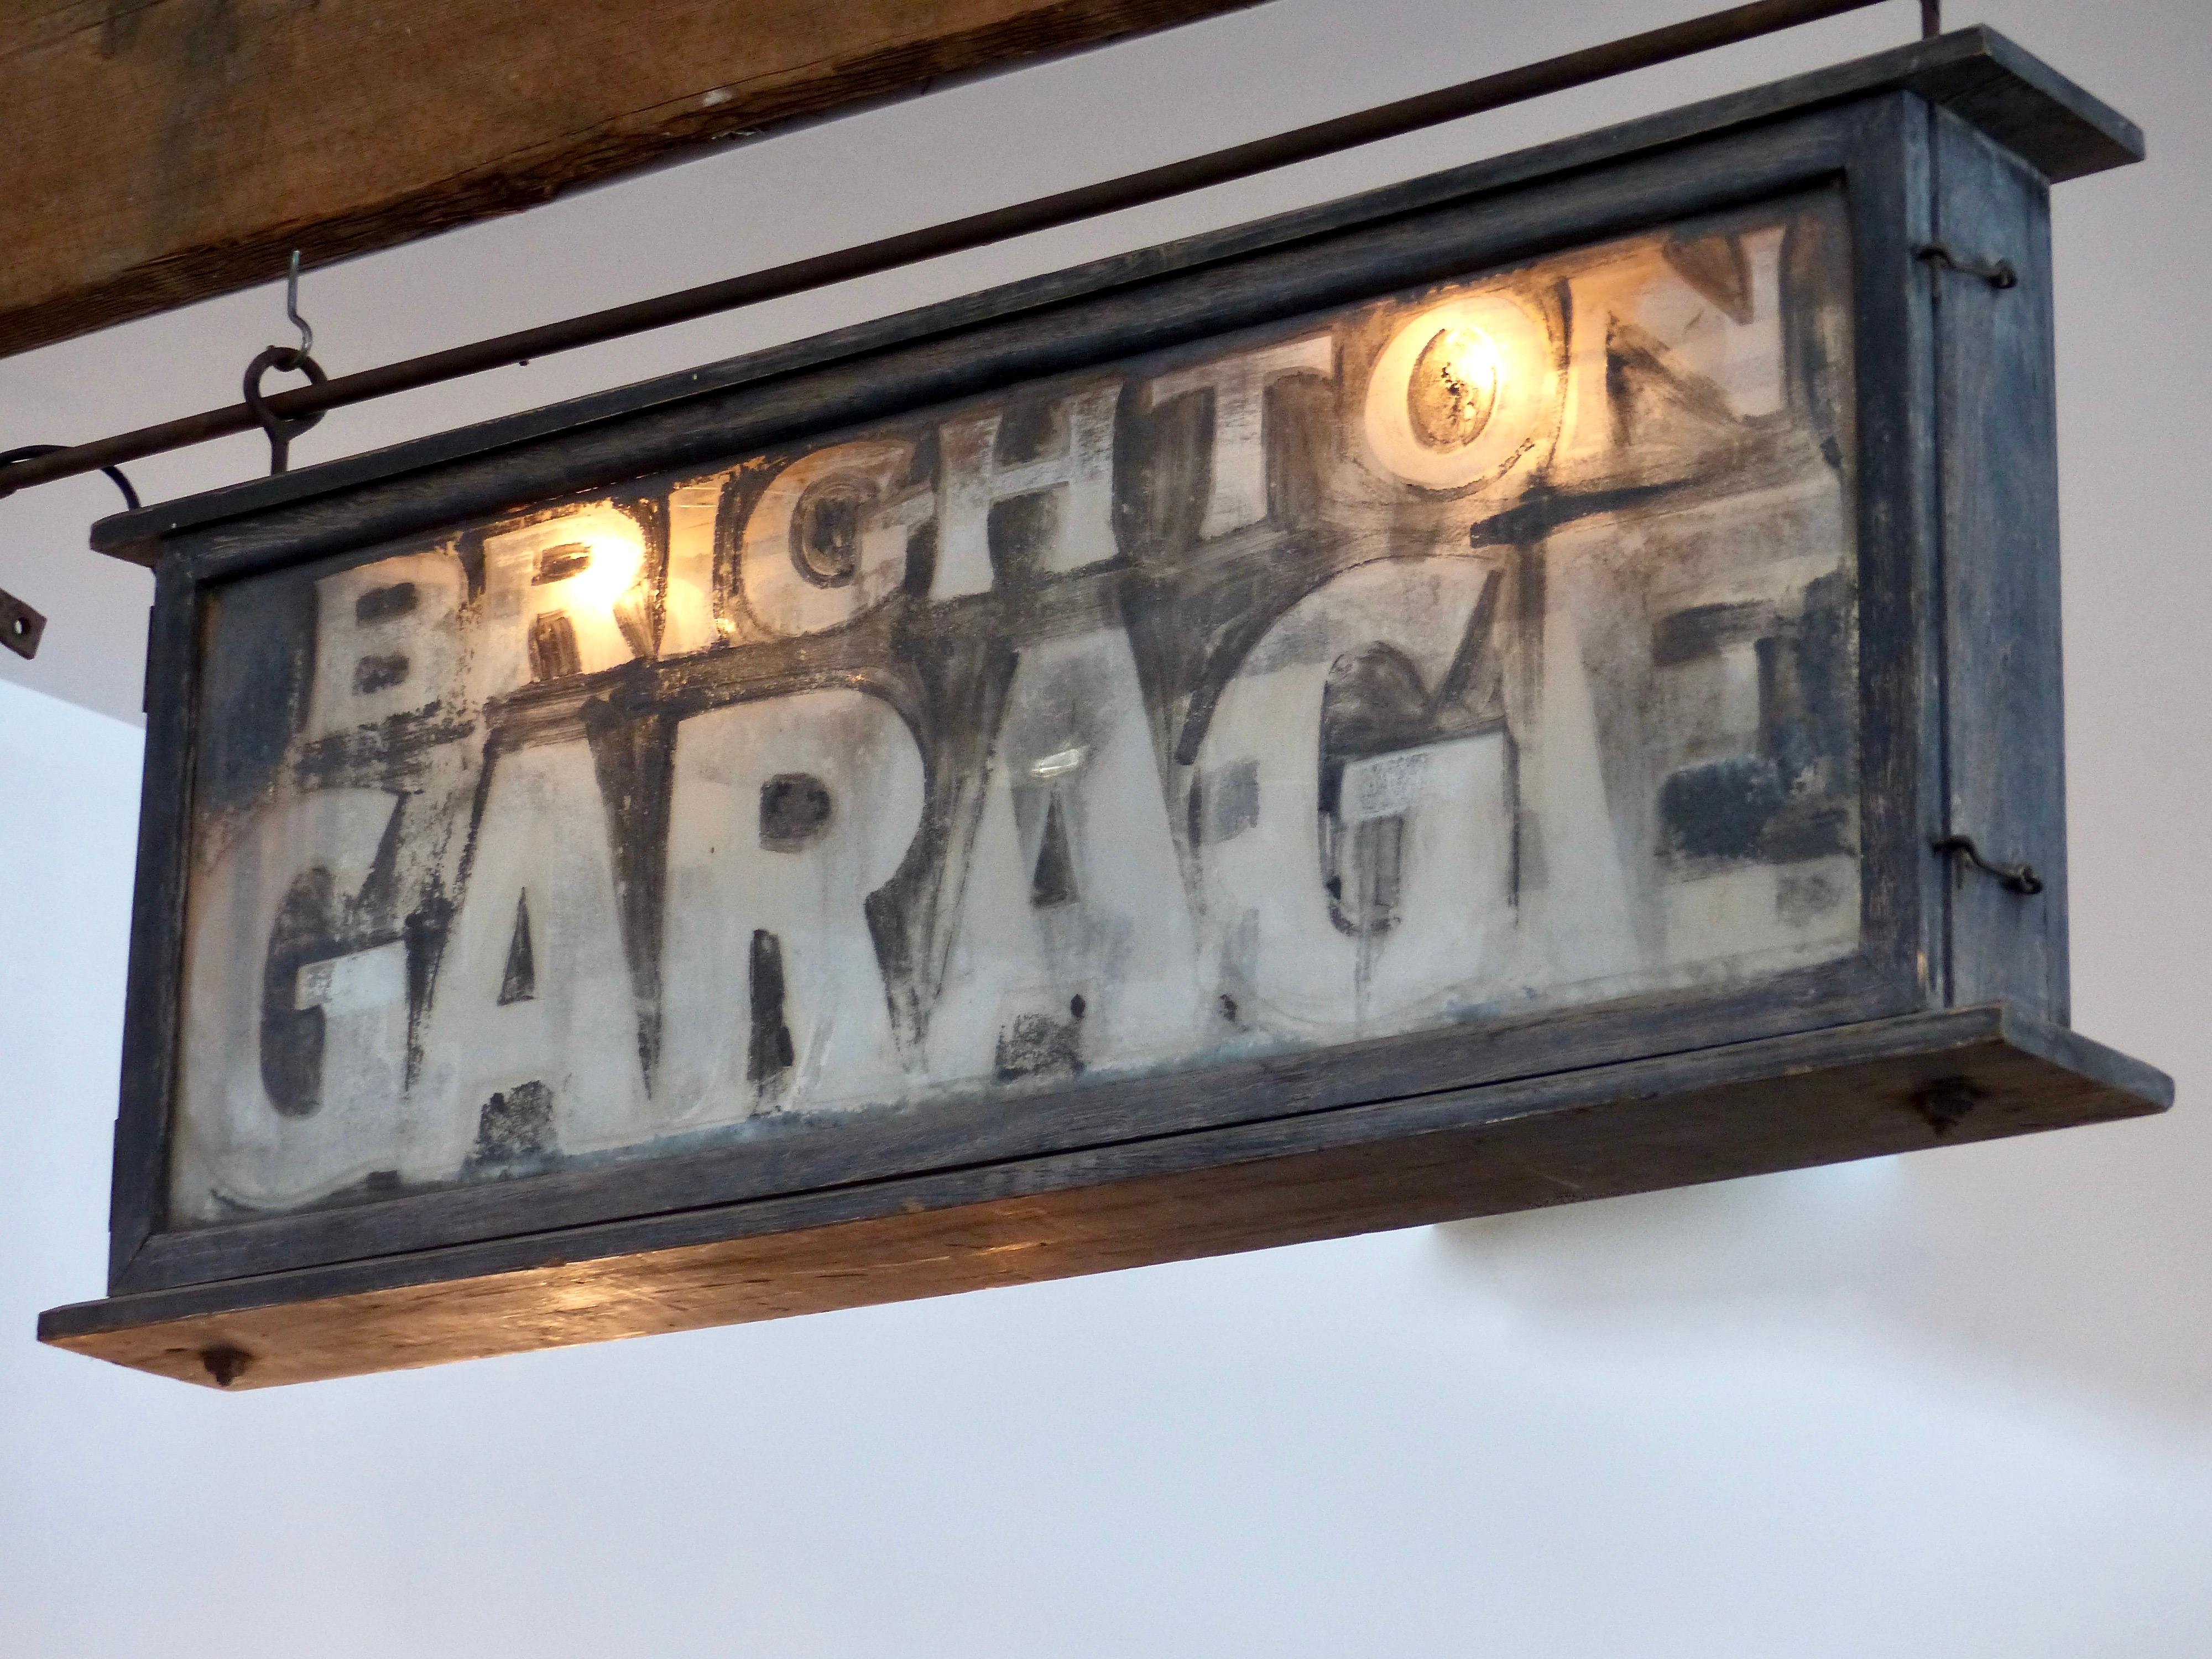 This is a very rare one of a kind automotive collector item.
Cantilevered cast iron sign for Brighton Garage. Two-sided, electrified sign with its lettering reverse-painted on glass. Wall-mounted mechanism, in wrought iron, for displaying the sign